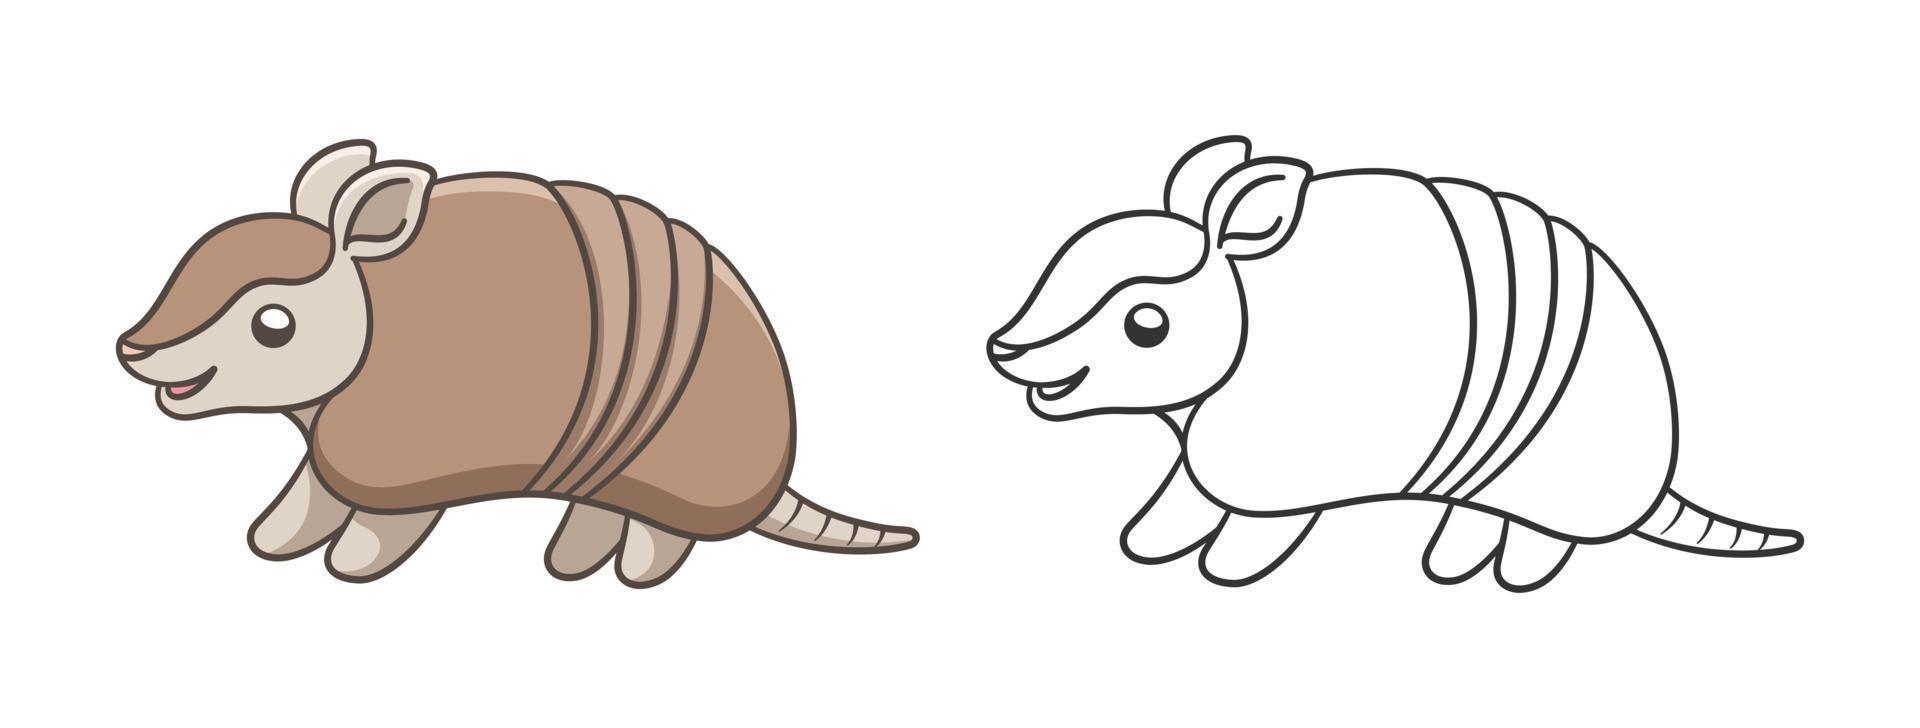 Armadillo standing and smiling black and white line art cartoon vector illustration simple version. Cute animal character coloring page design for kids.